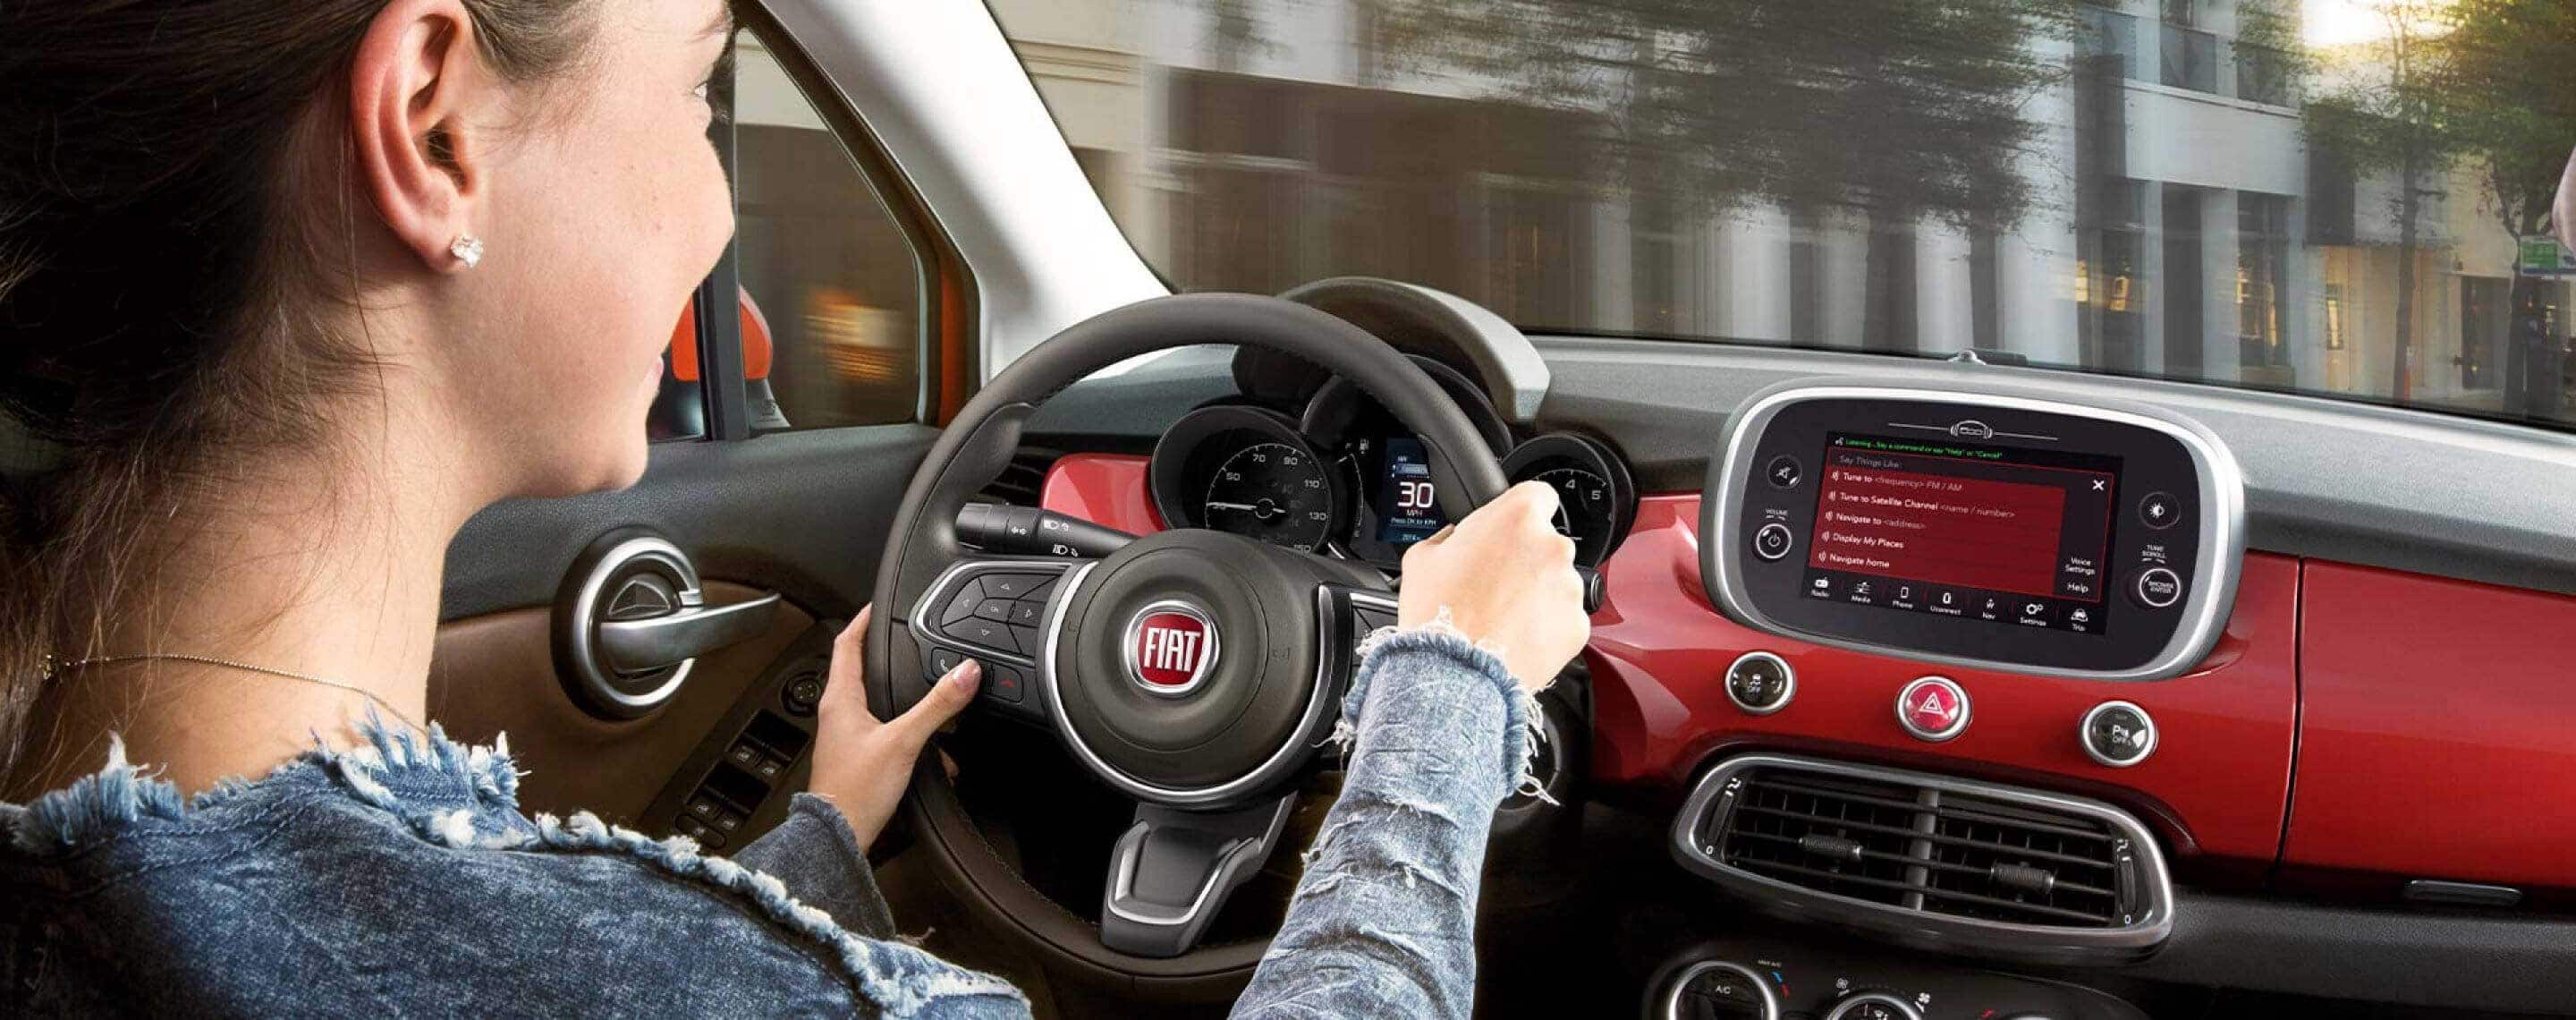 The driver of a 2021 Fiat 500X Trekking Plus watching the road while pressing one of the buttons on the steering wheel-mounted controls.